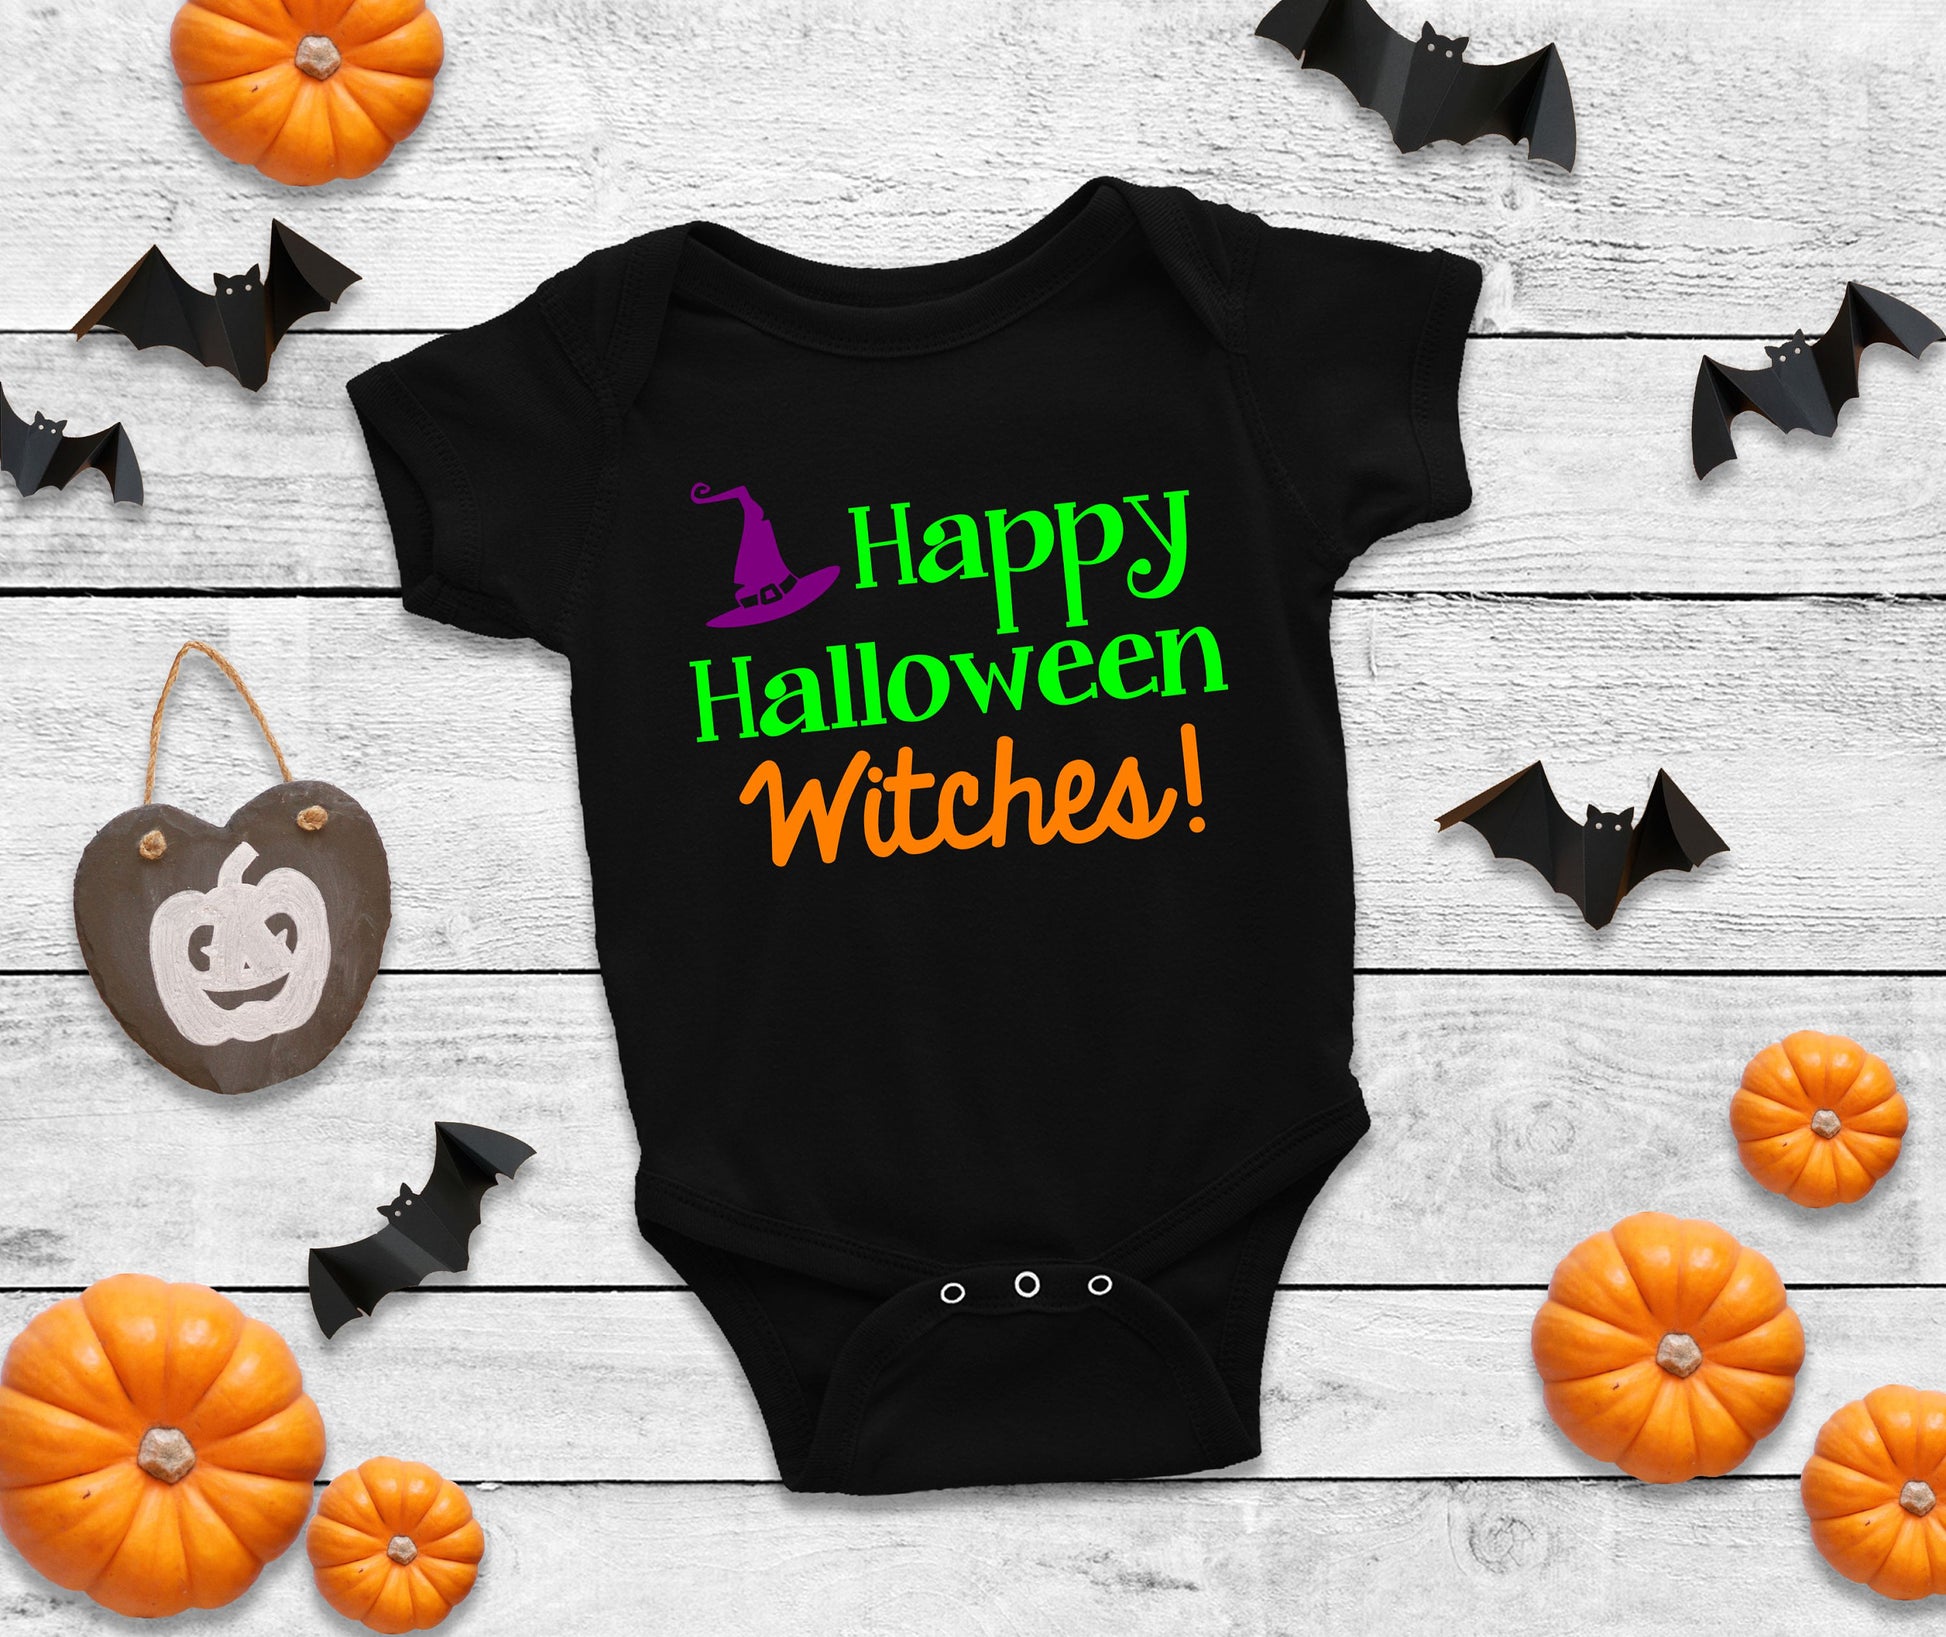 Happy Halloween Witches Shirt or Bodysuit - My First Halloween - baby halloween - baby girl halloween shirt - halloween witches